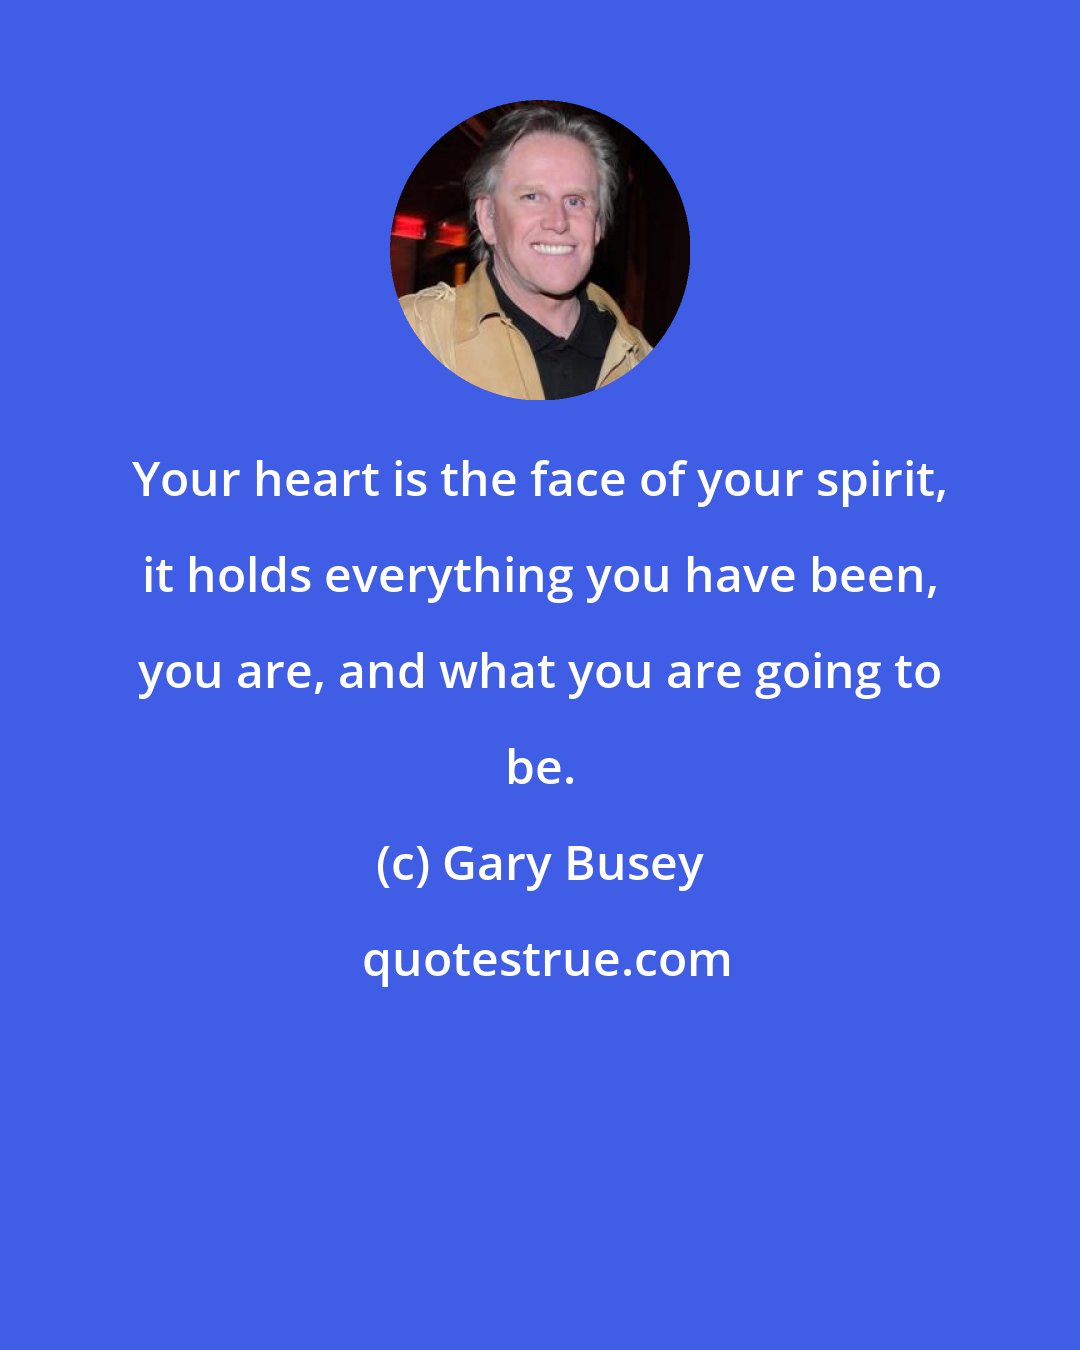 Gary Busey: Your heart is the face of your spirit, it holds everything you have been, you are, and what you are going to be.